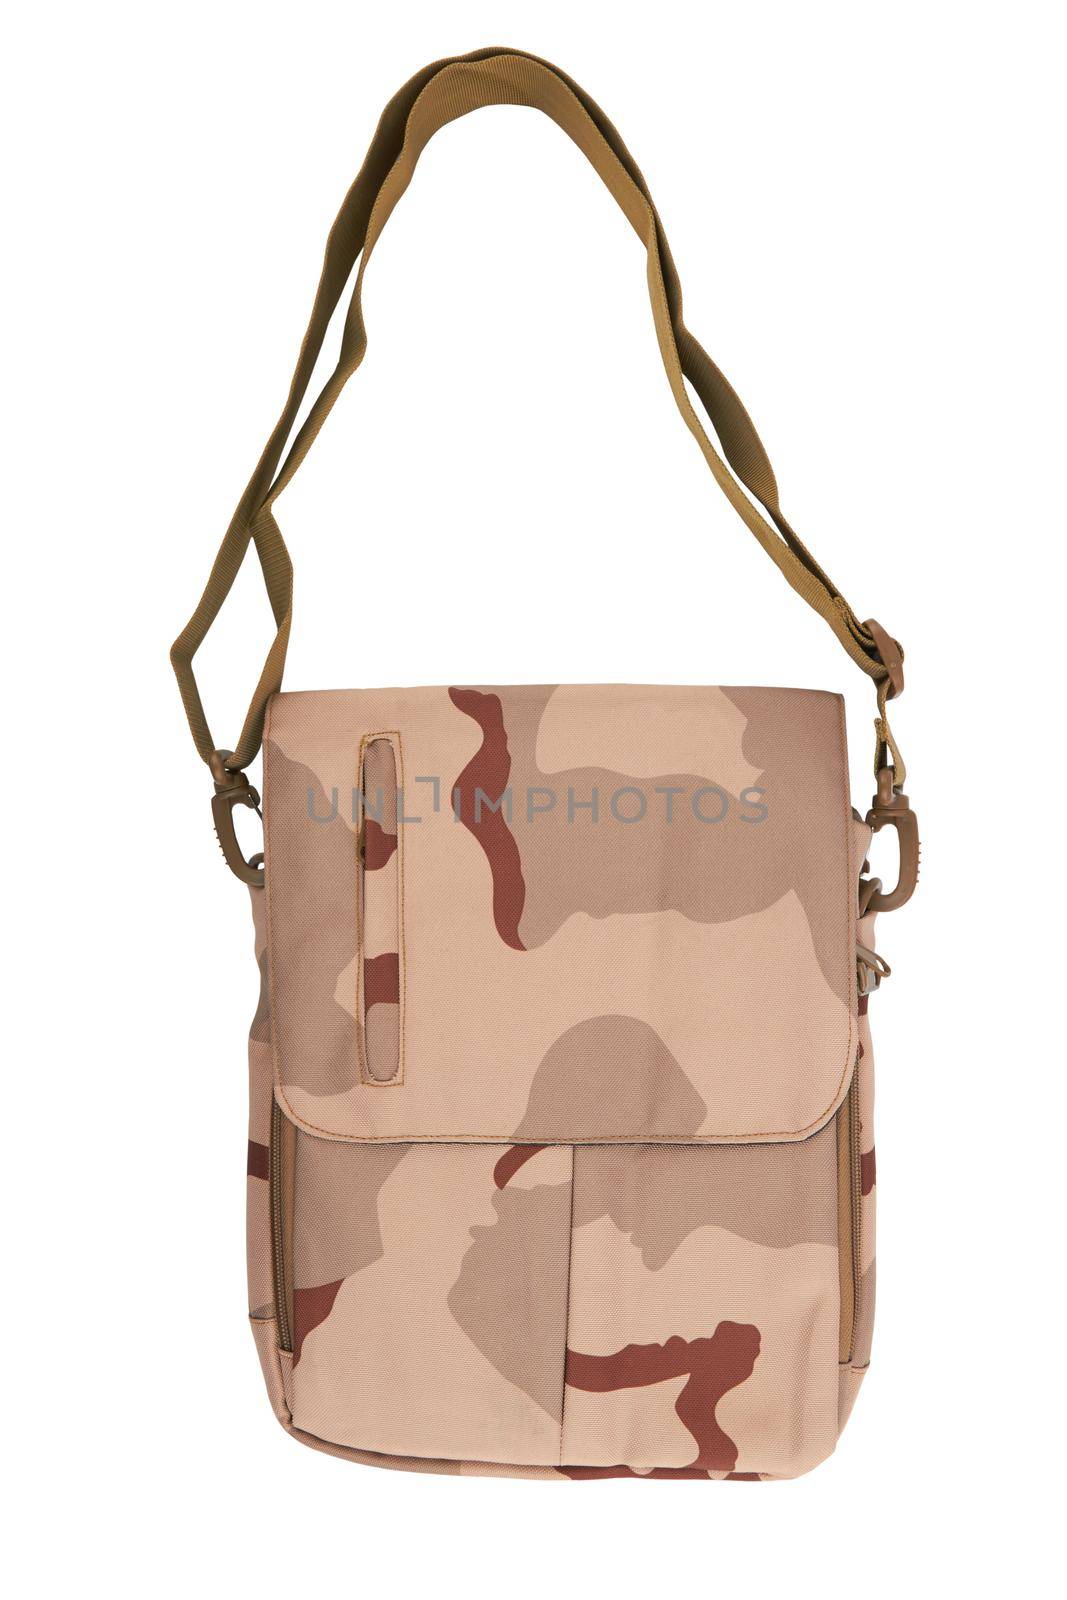 Shoulder bag military isolated on a white background